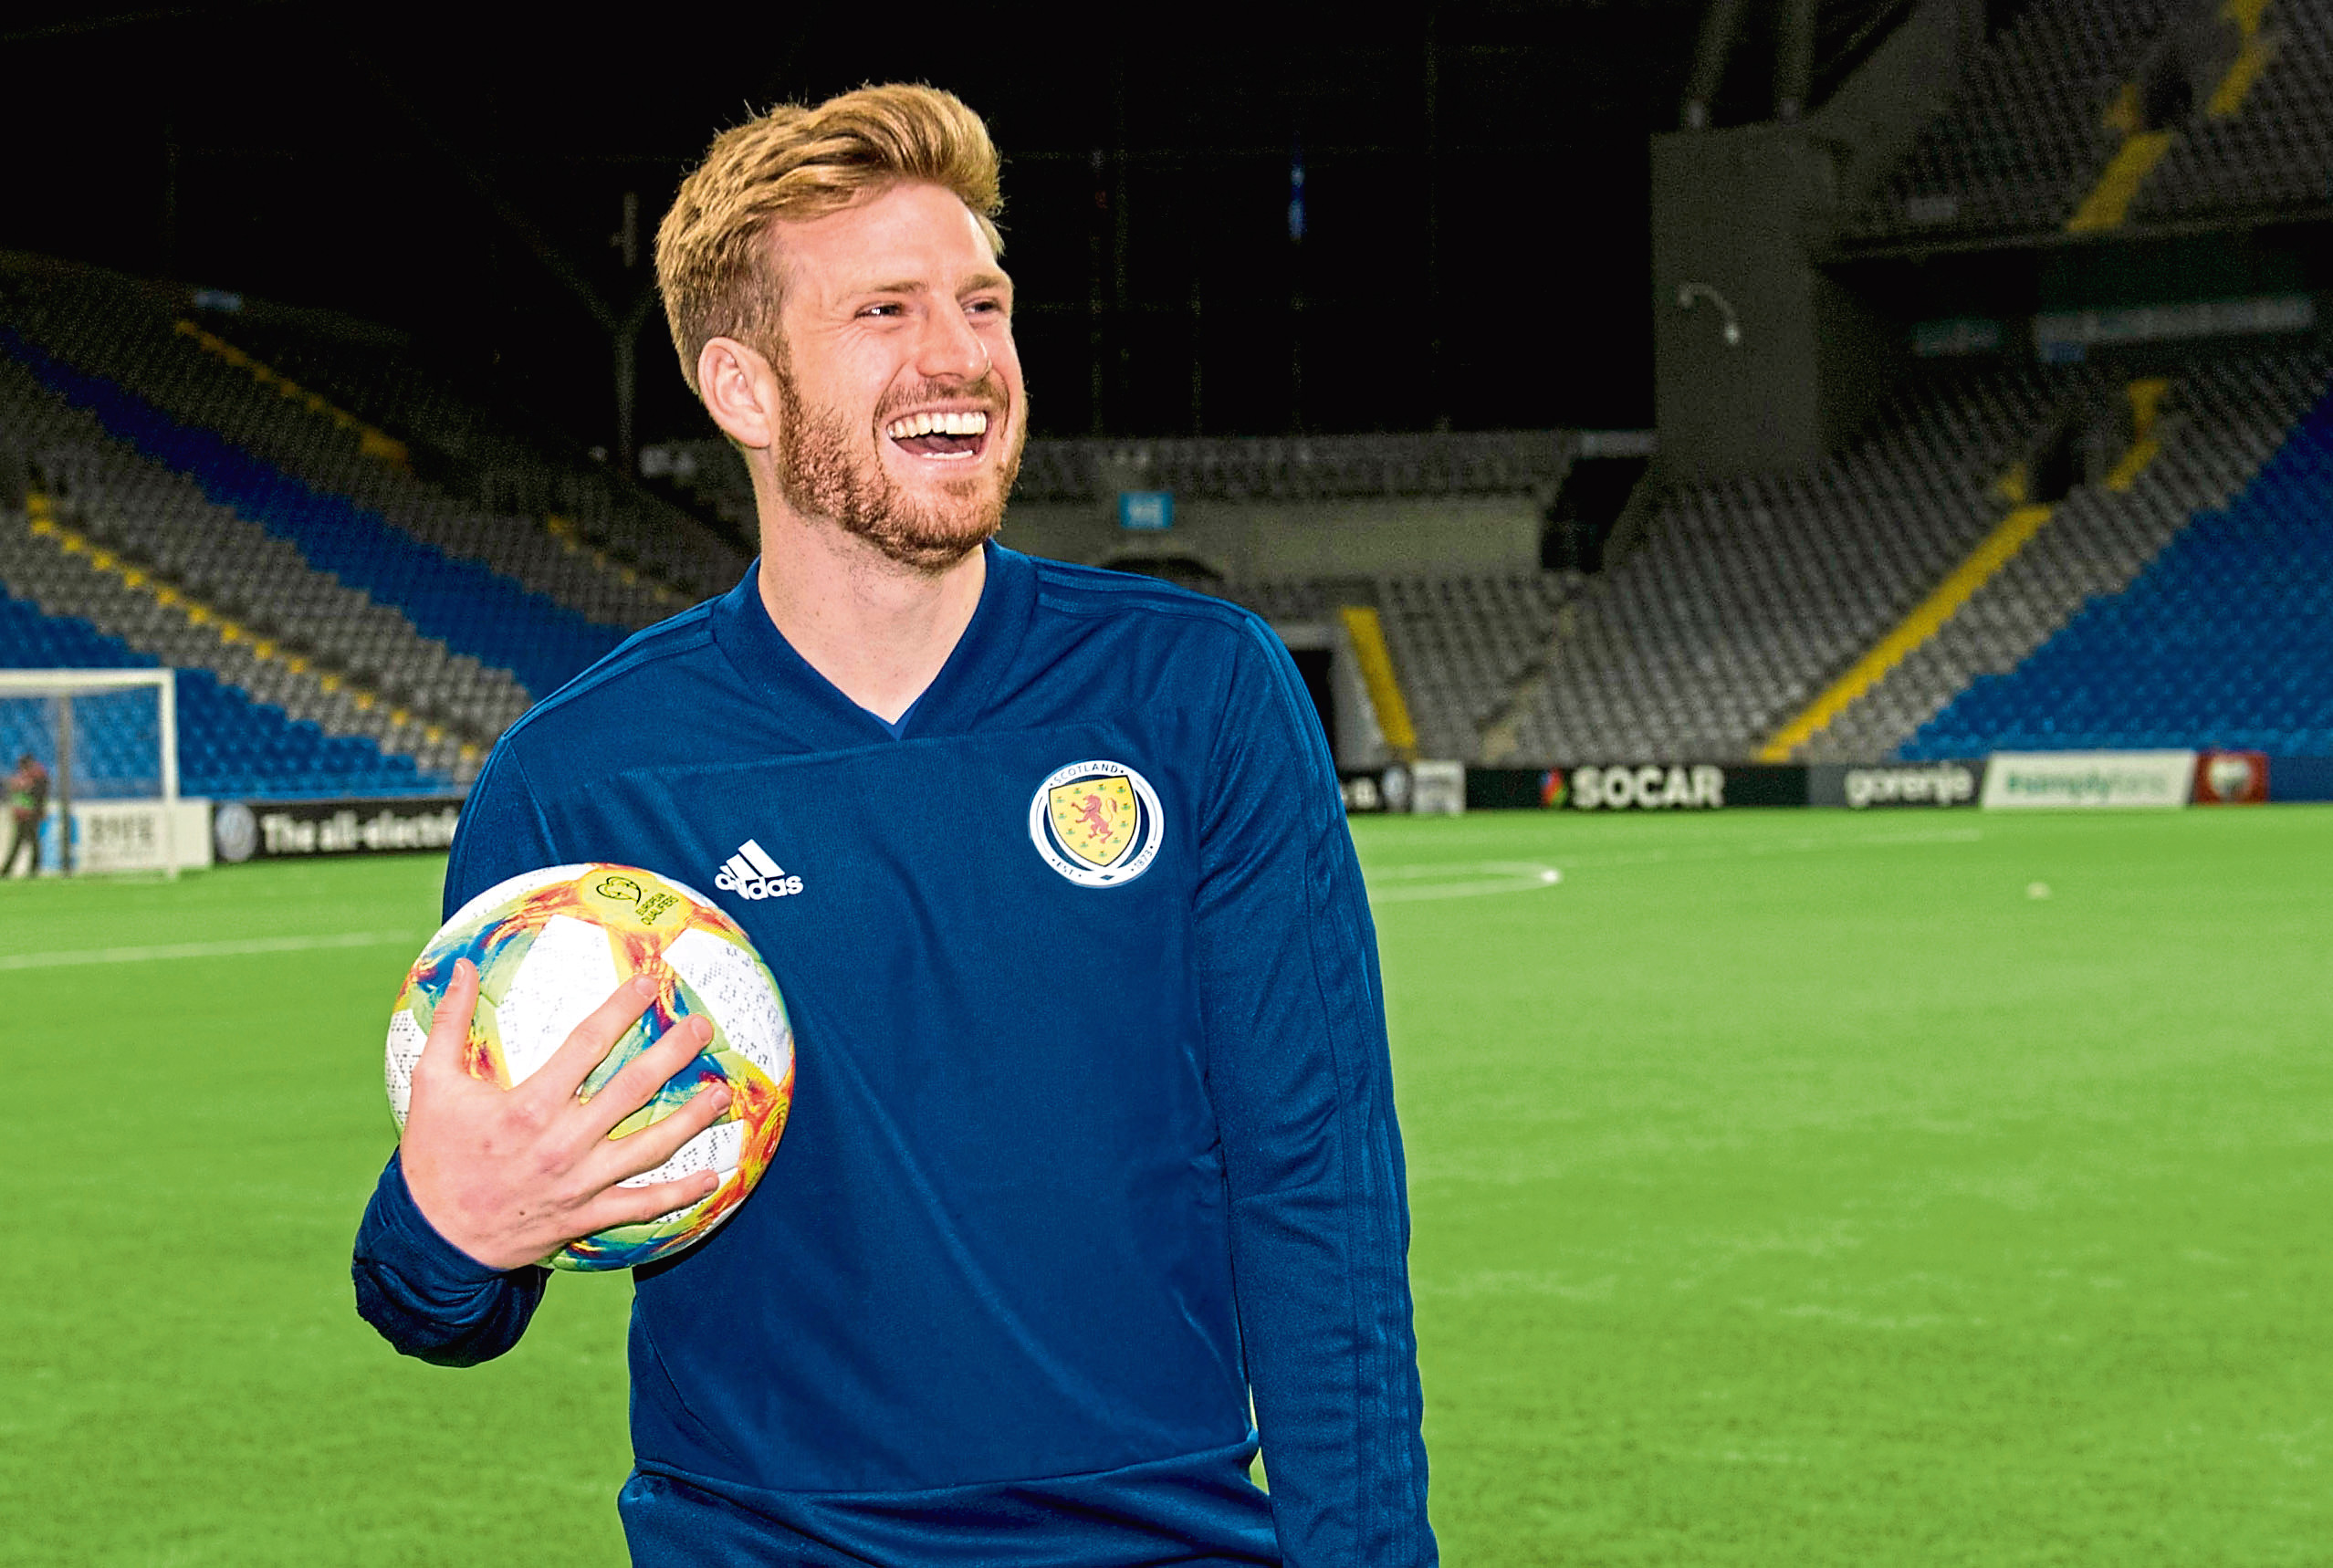 Scotland's Stuart Armstrong is among the many stars who first shone at Dyce Boys Club.